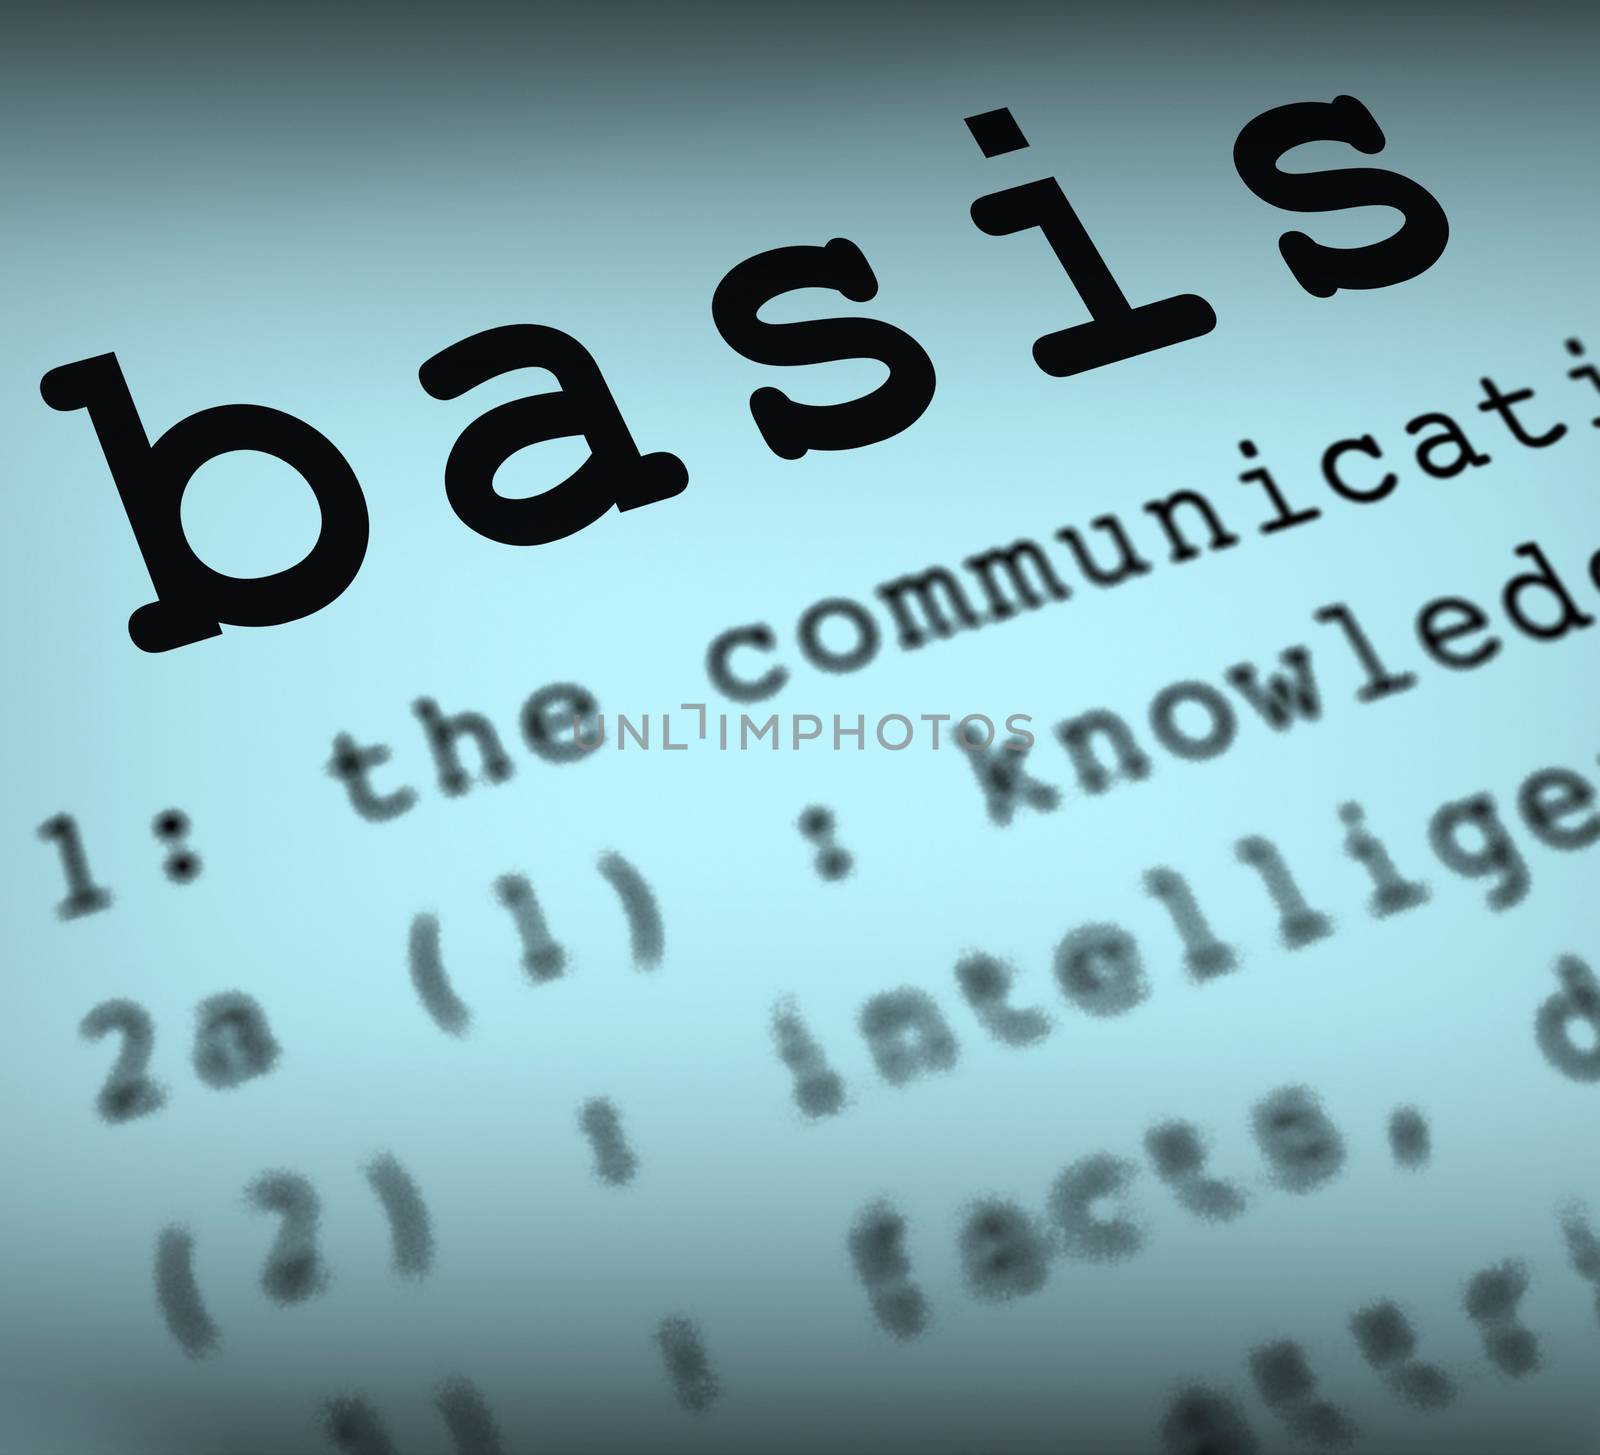 Basis Definition Means Principles And Essential Ideas by stuartmiles